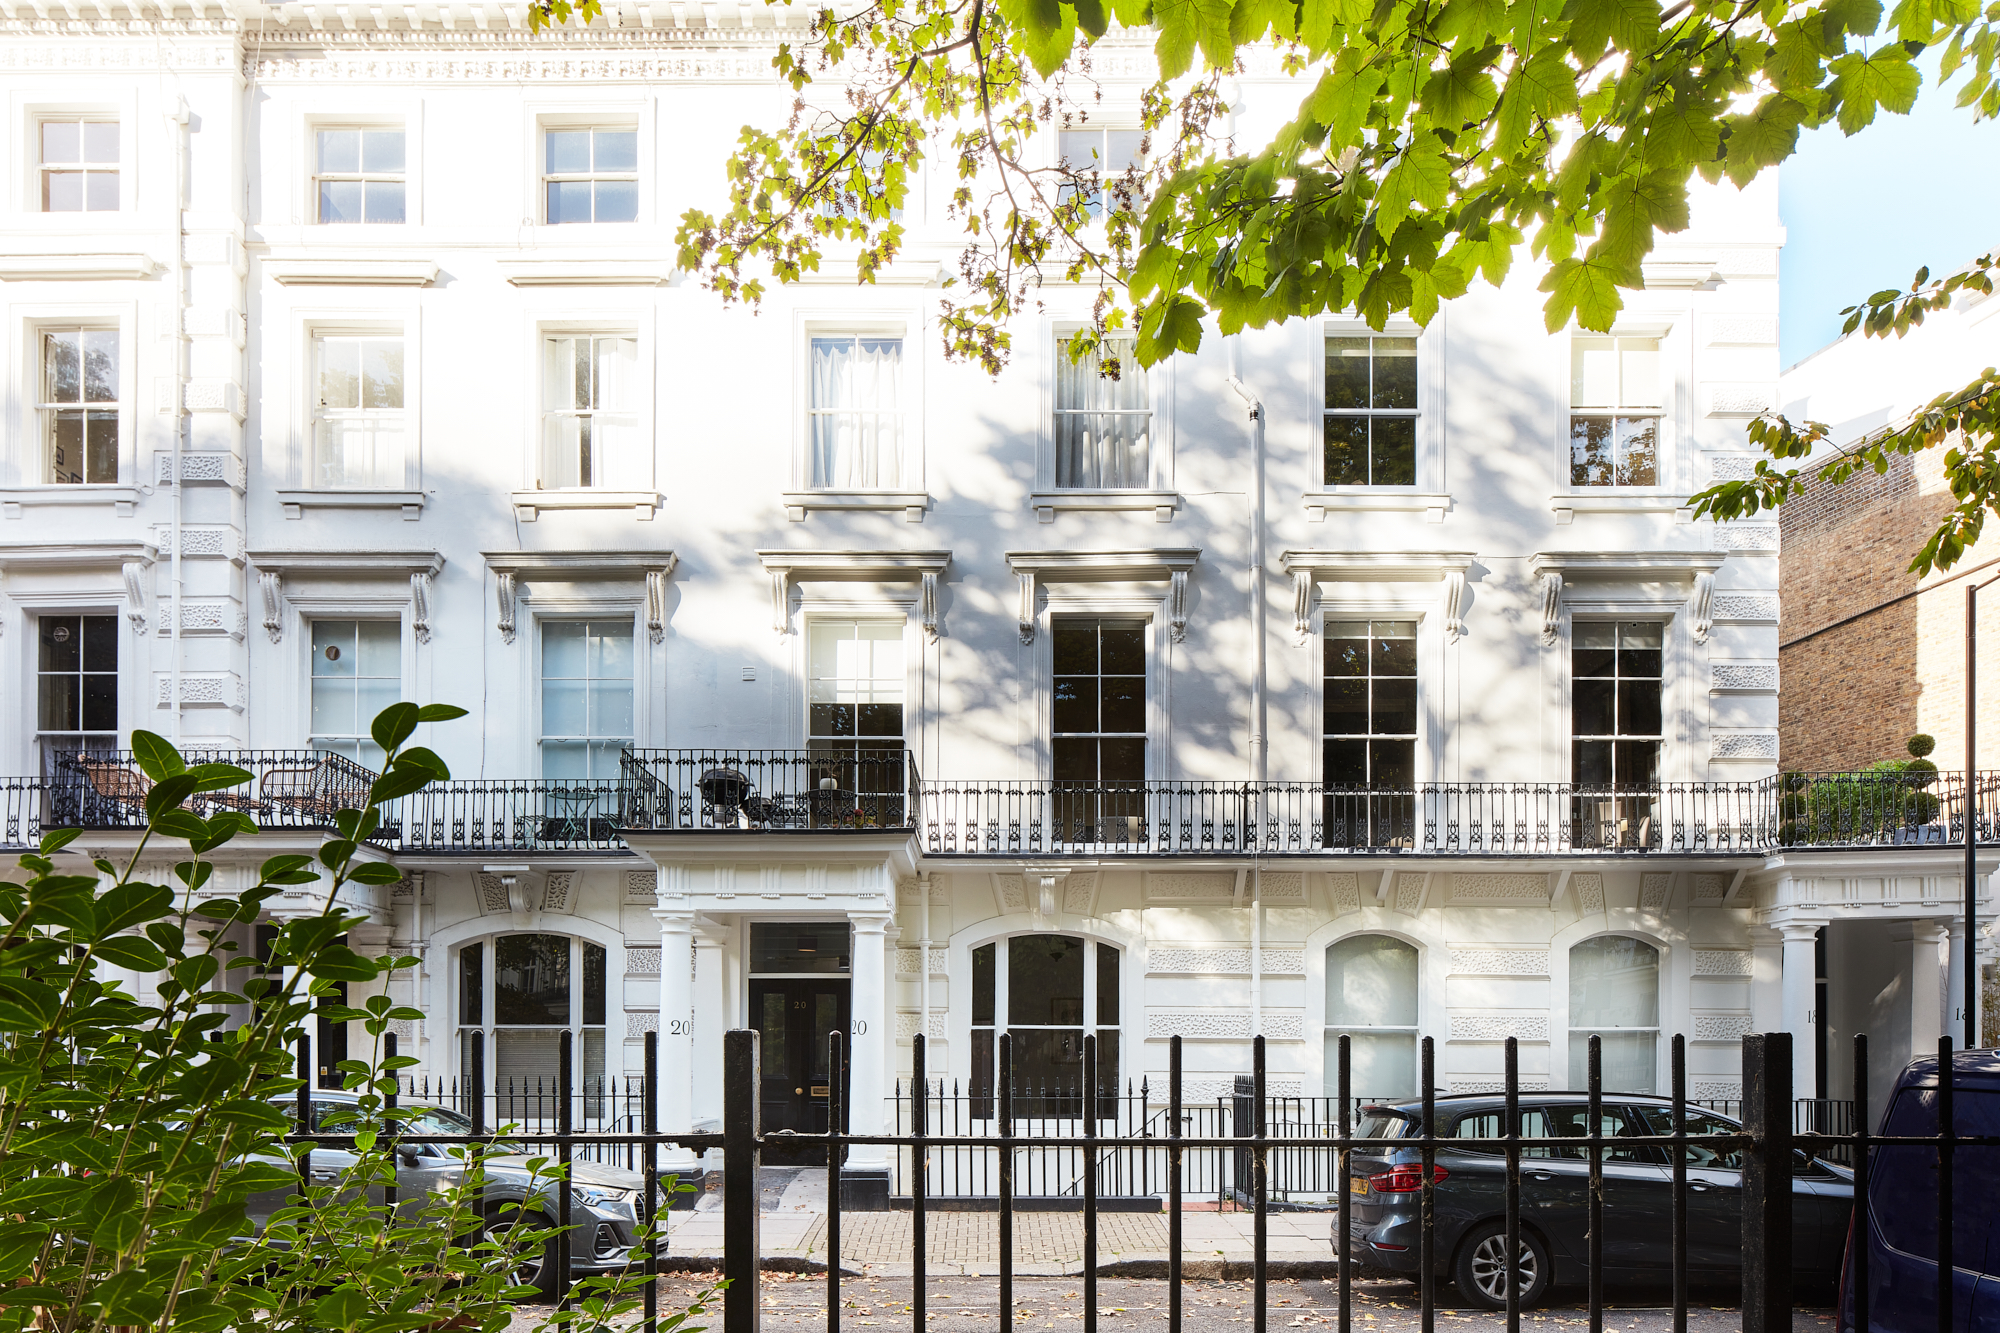 For Sale: Westbourne Gardens Notting Hill W11 rows of stucco-fronted period townhouse